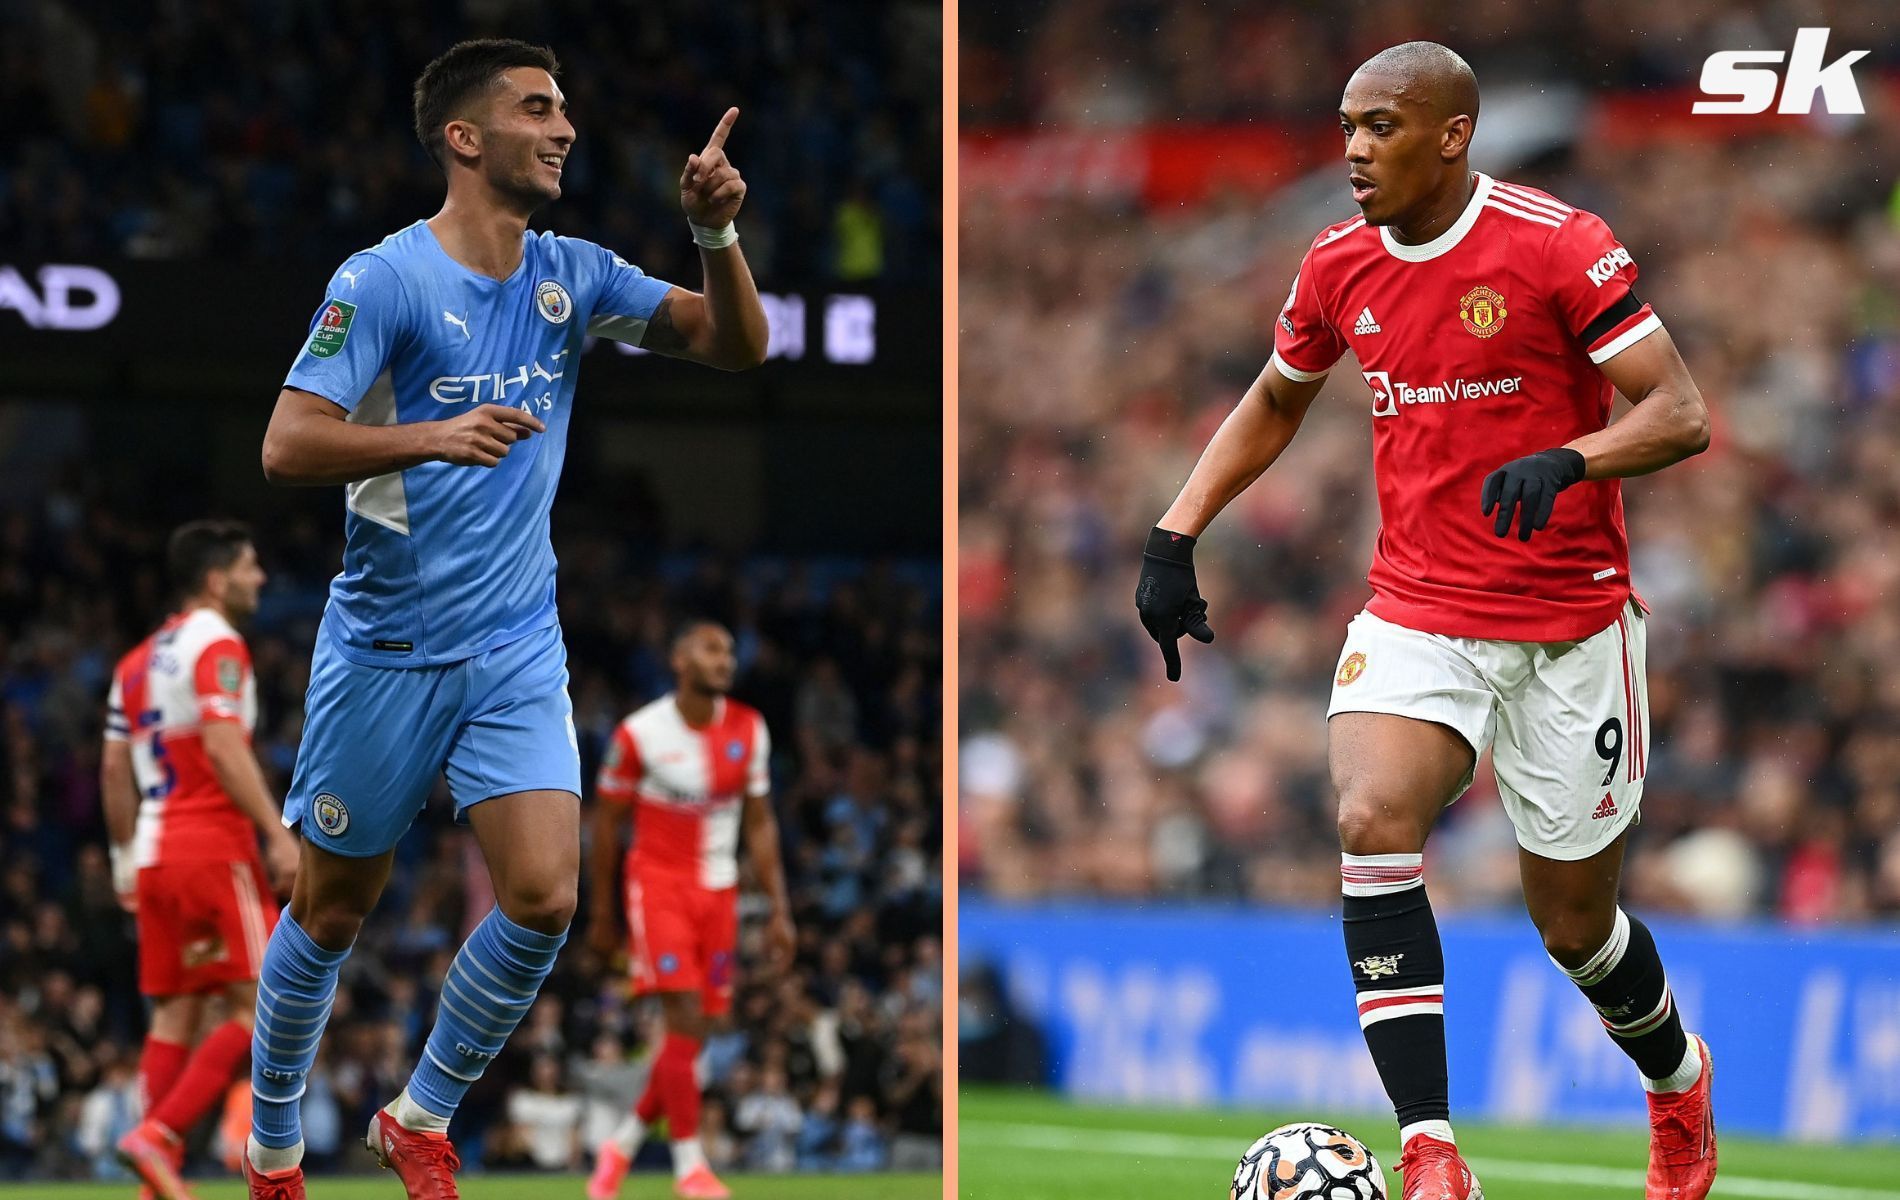 The Premier League is set to lose some top players